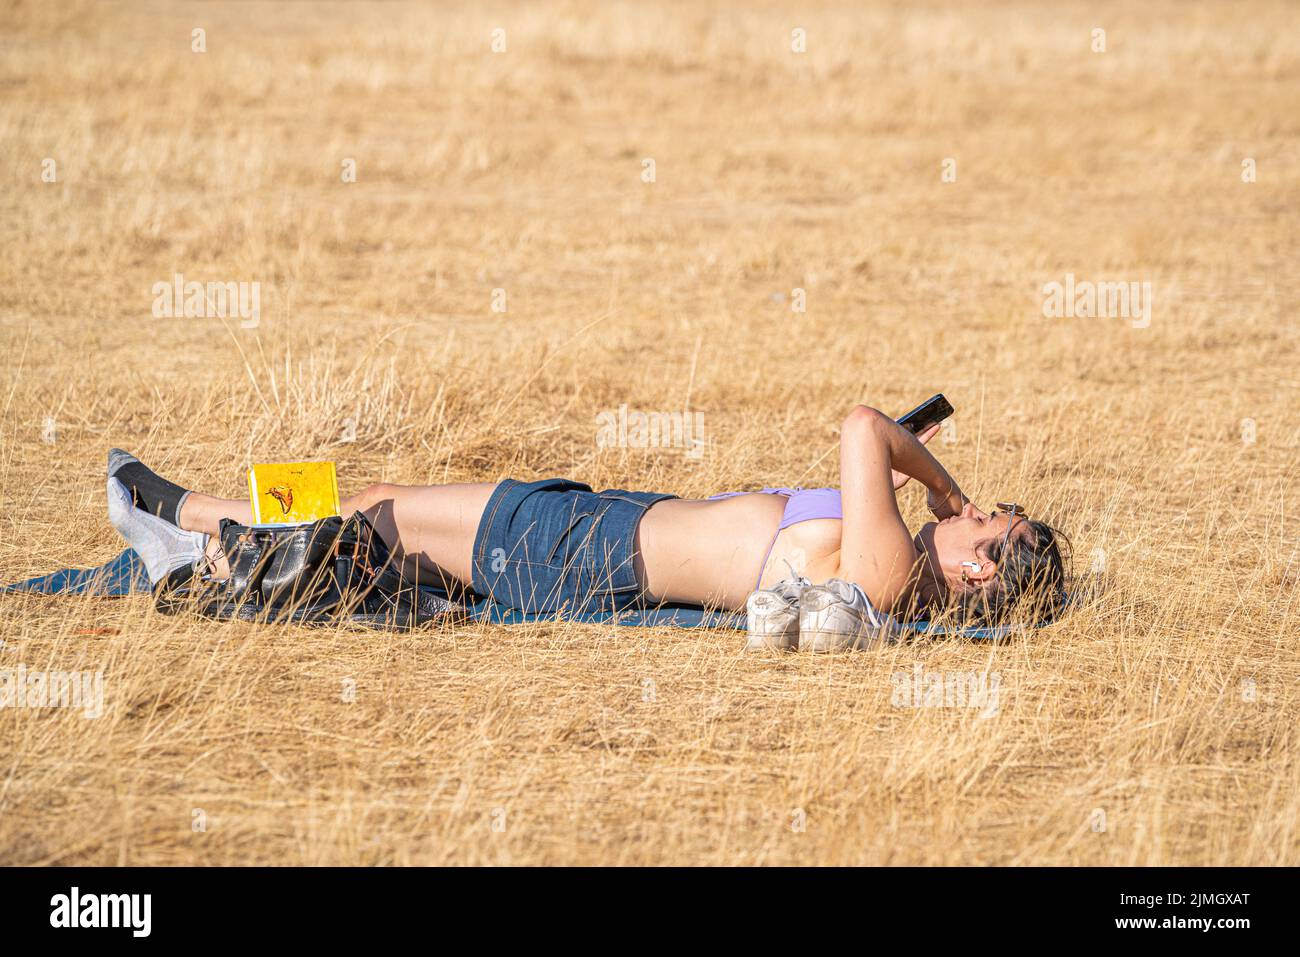 Wimbledon, London, UK. 6 August 2022  A  woman  relaxing in the afternoon sunshine on the parched  grass of Wimbledon Common  as the hot weather and a lack of rainfall continue to grip much of the south of England and the UK, with temperatures expected to reach  above 30celsius  by next week Credit. amer ghazzal/Alamy Live News Stock Photo